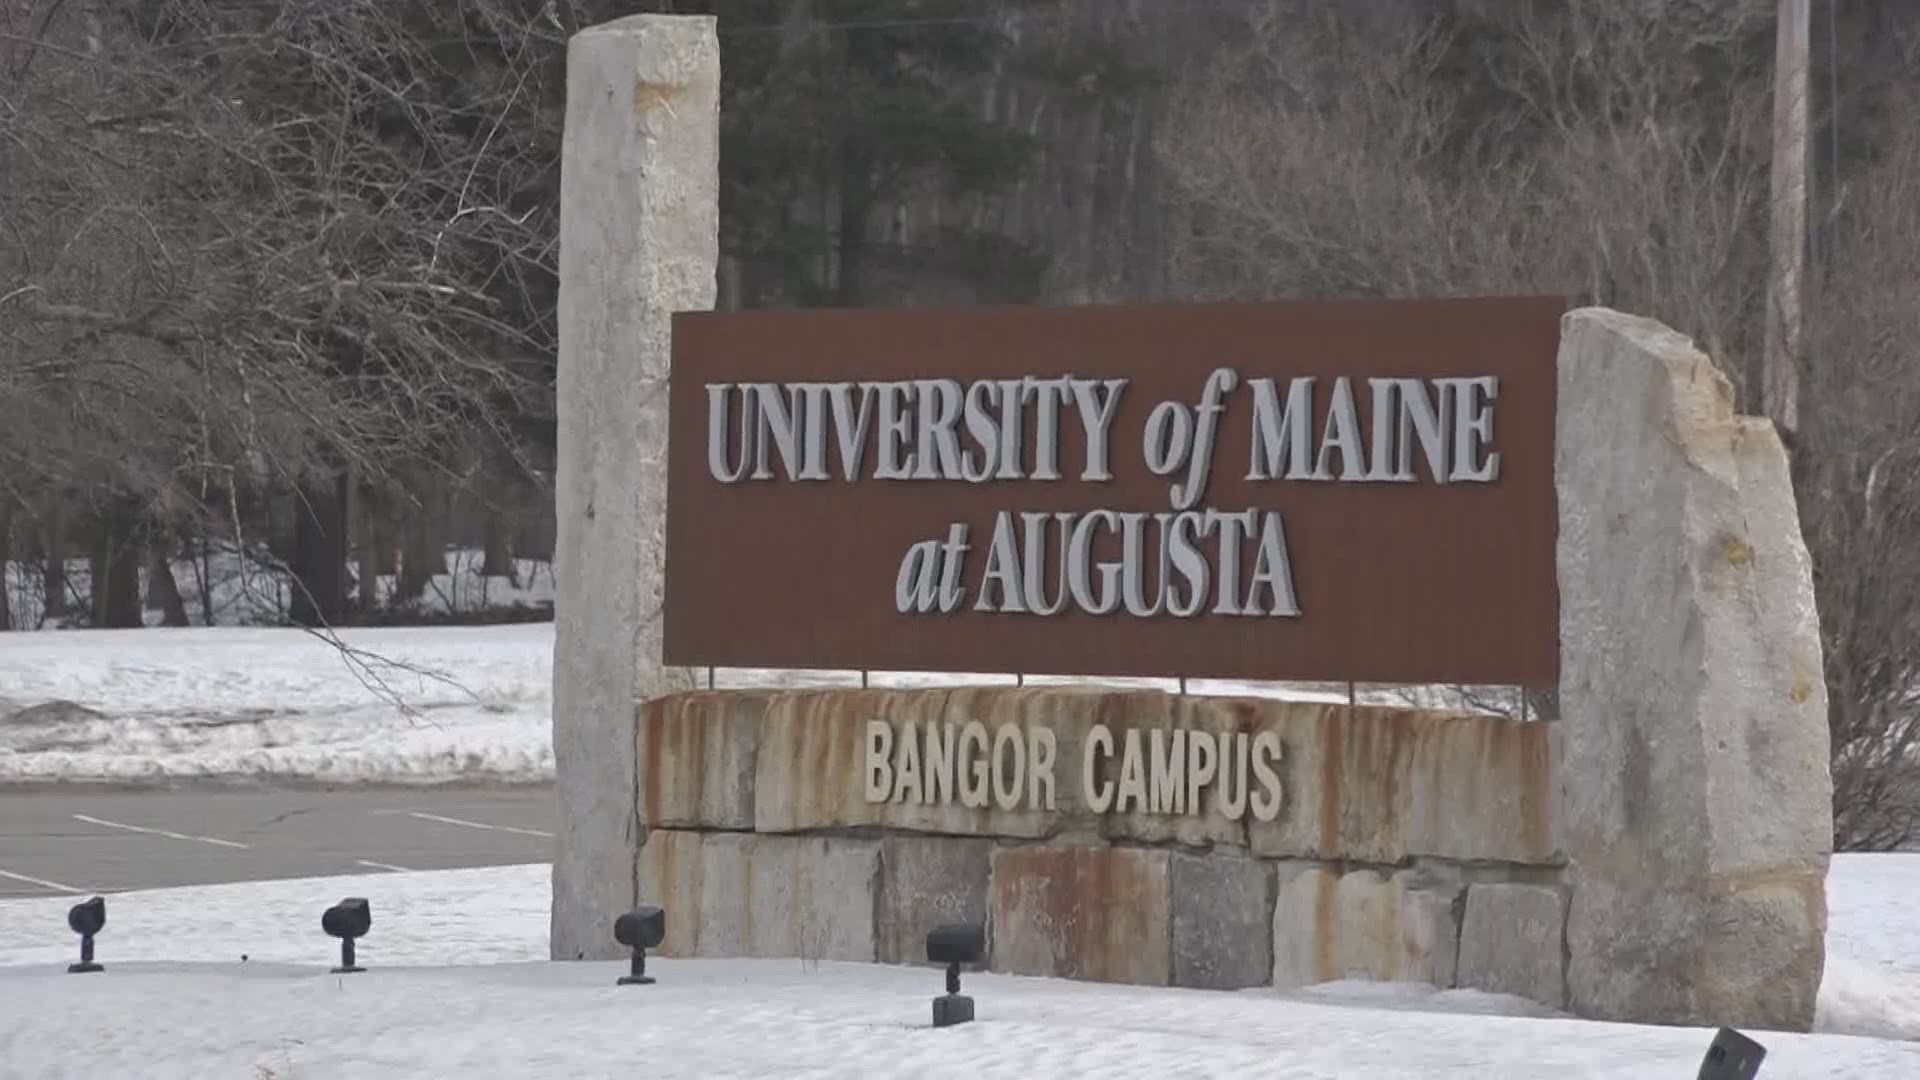 Navy veteran Leo Porter says without the support of the University of Maine at Augusta, he wouldn't have been able to finish his first semester.